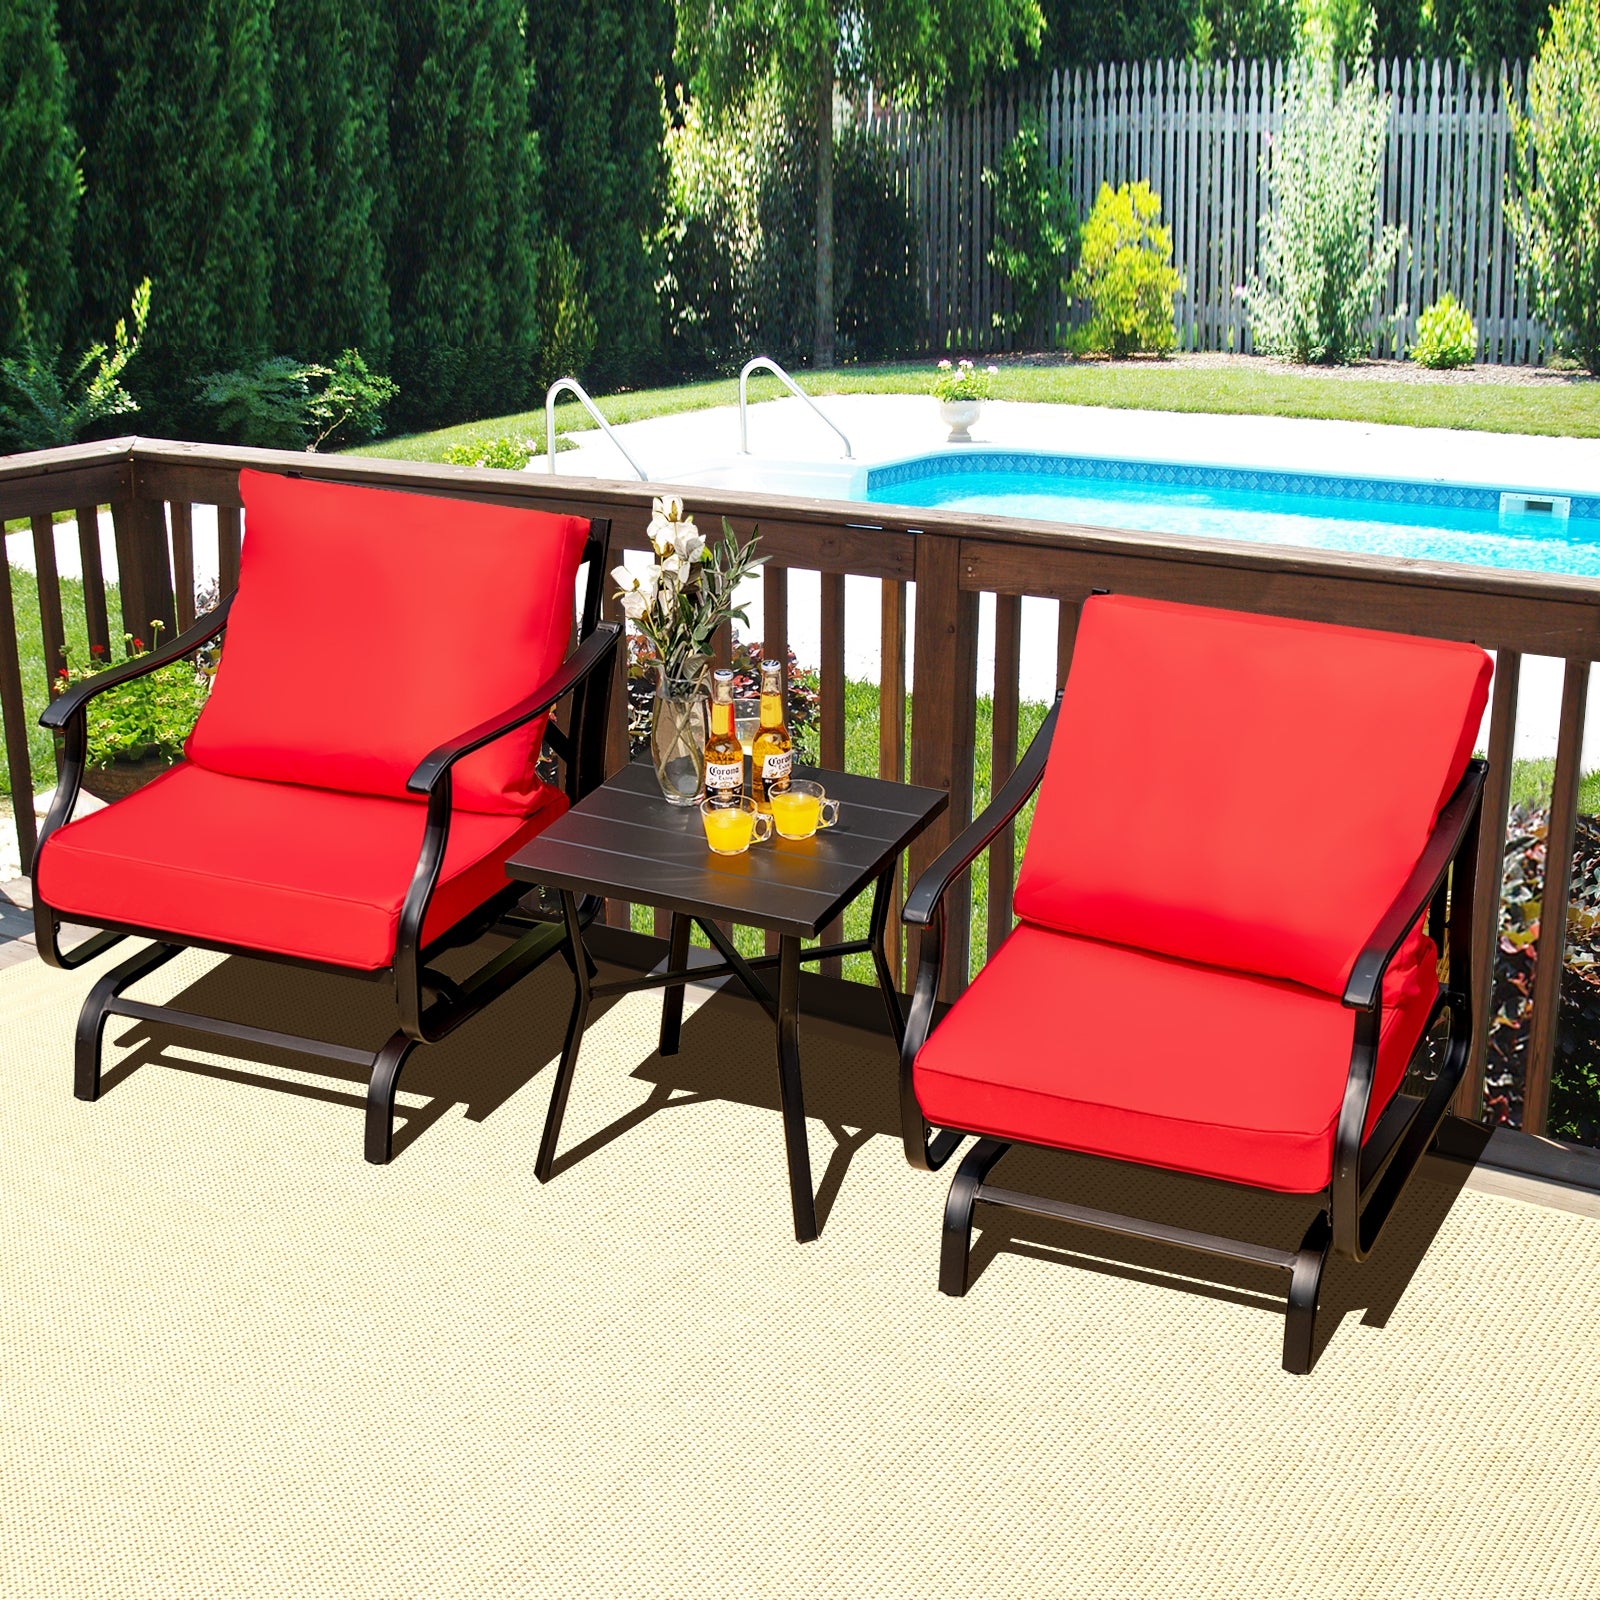 3 Piece Patio Rocking Chair Set with Coffee Table